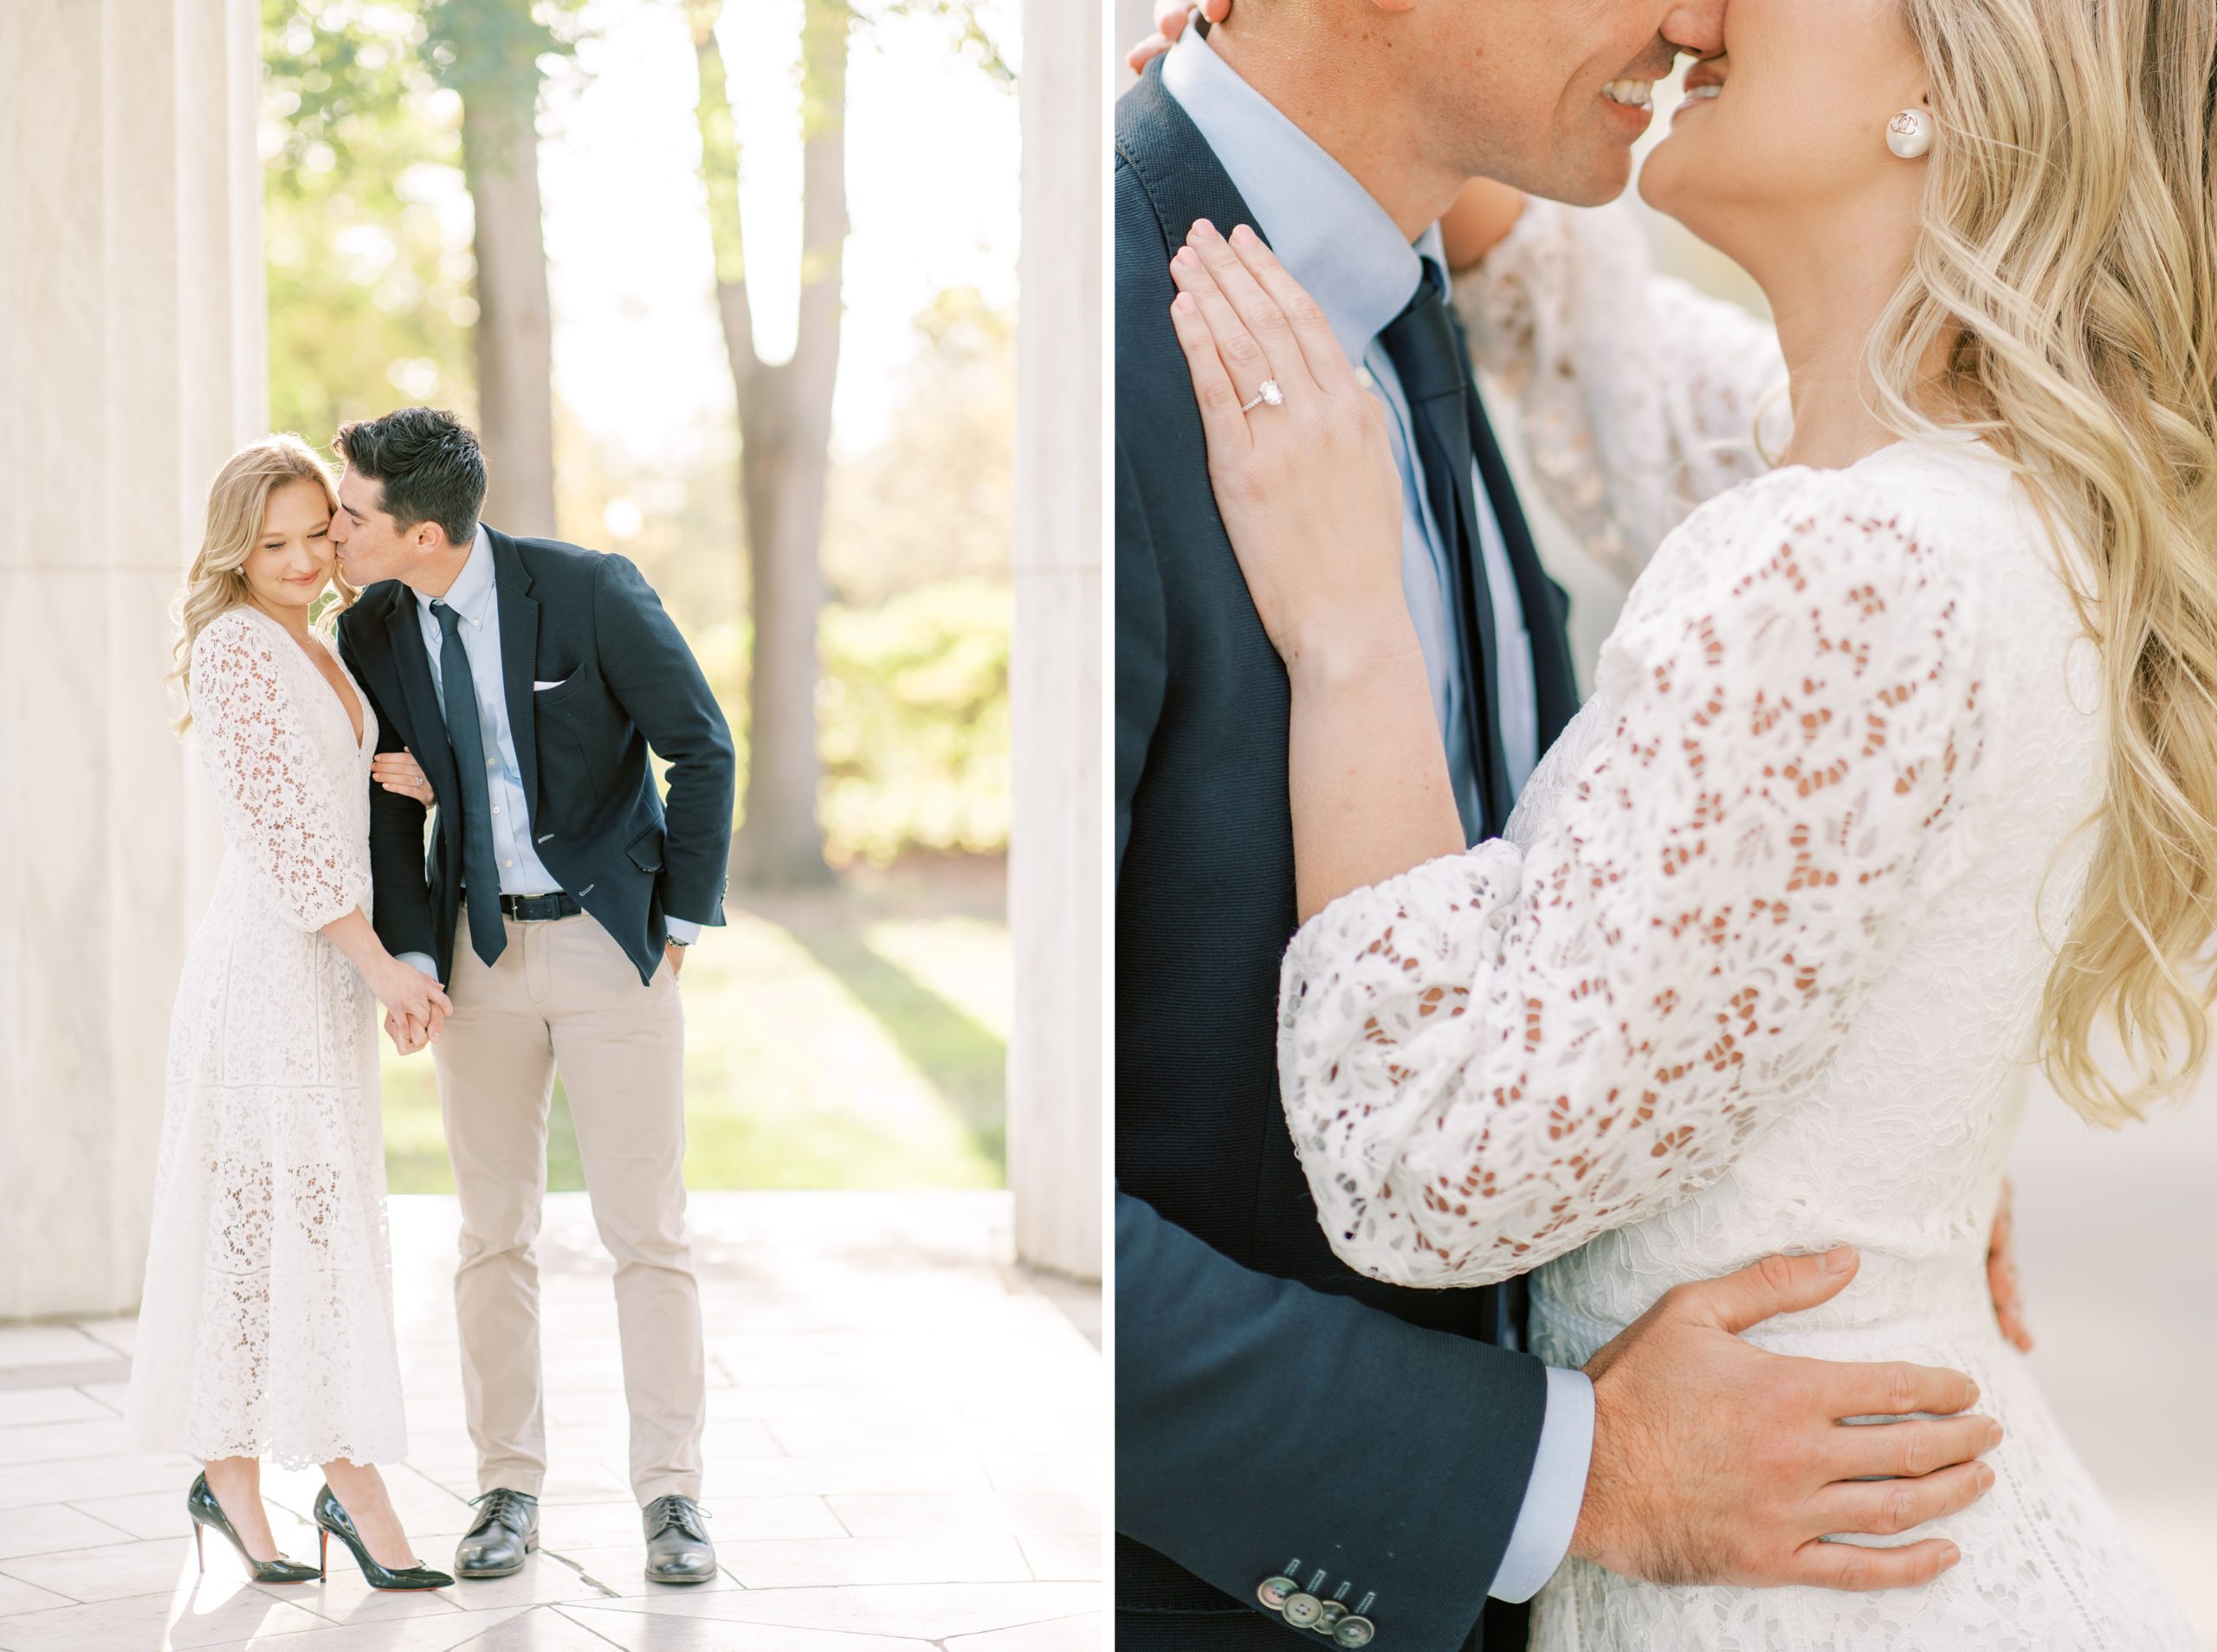 A romantic engagement session with a stylish couple at the Lincoln Memorial and DC War Memorial in Washington, DC.